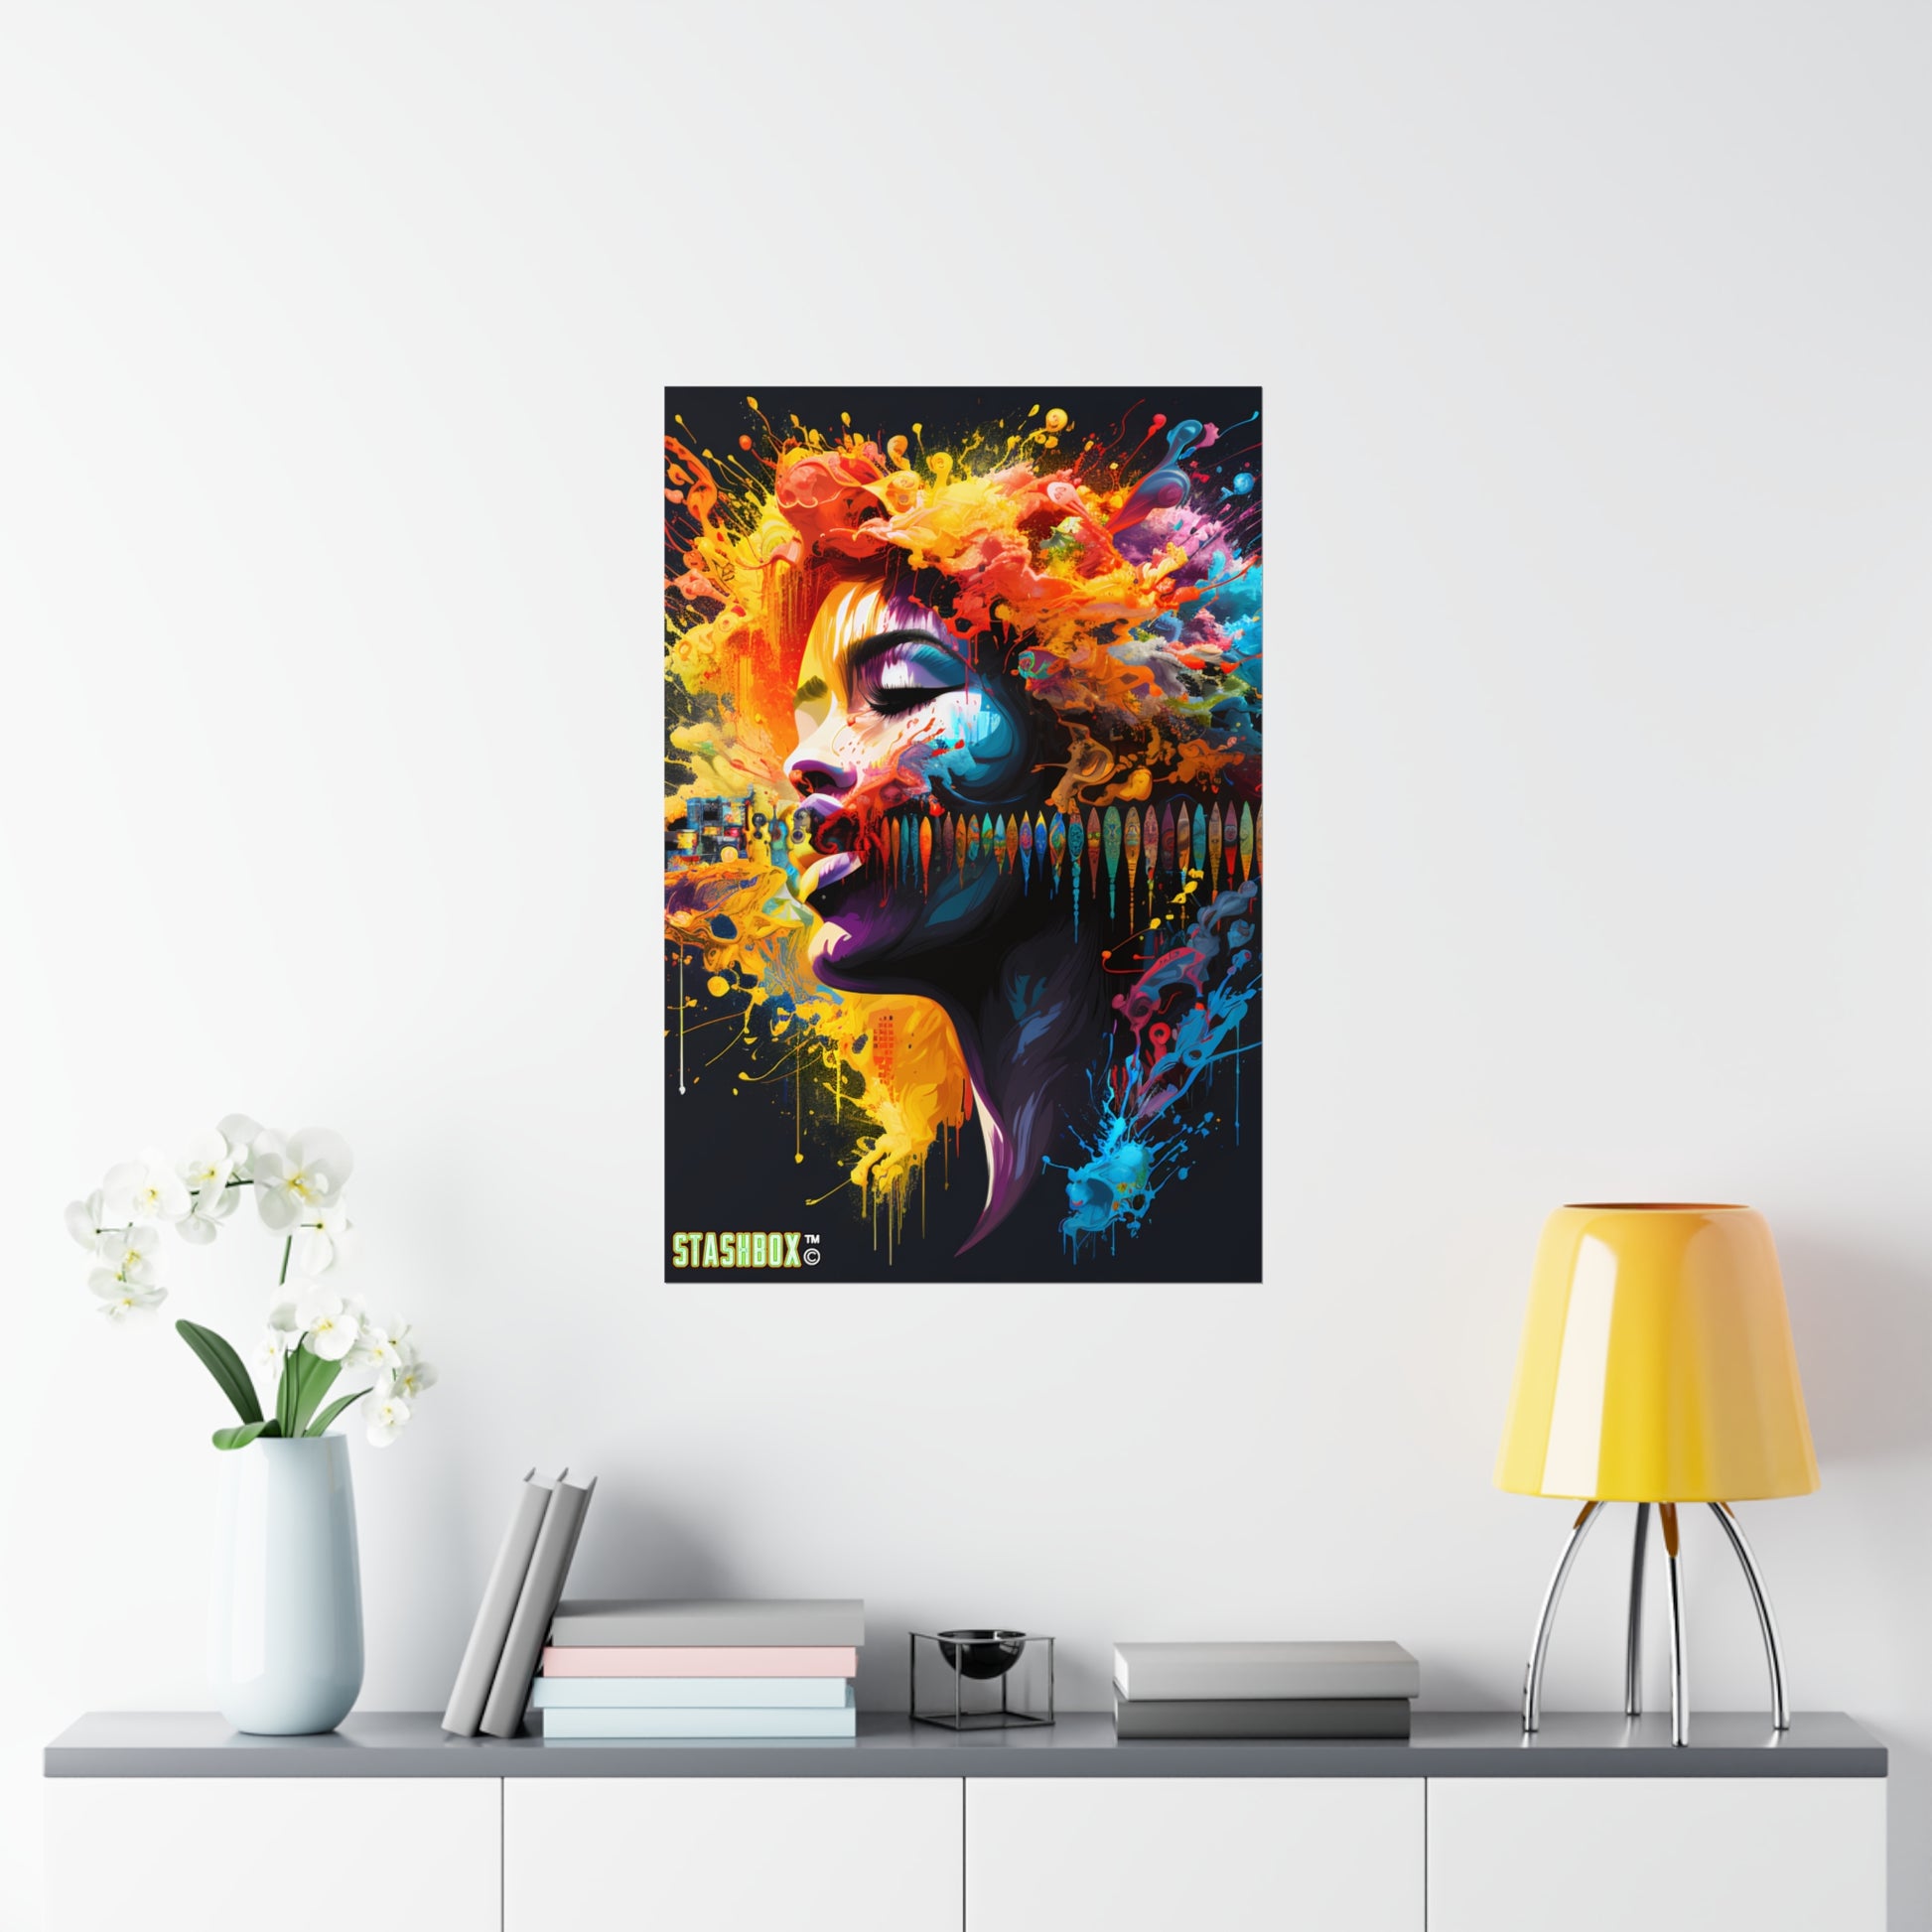 Dress your walls in artistic brilliance with our Female Singer & Surfboards Artistic Poster, 24″ x 36″. Surfboards Design #006. Your art, your harmony, exclusively at Stashbox.ai.